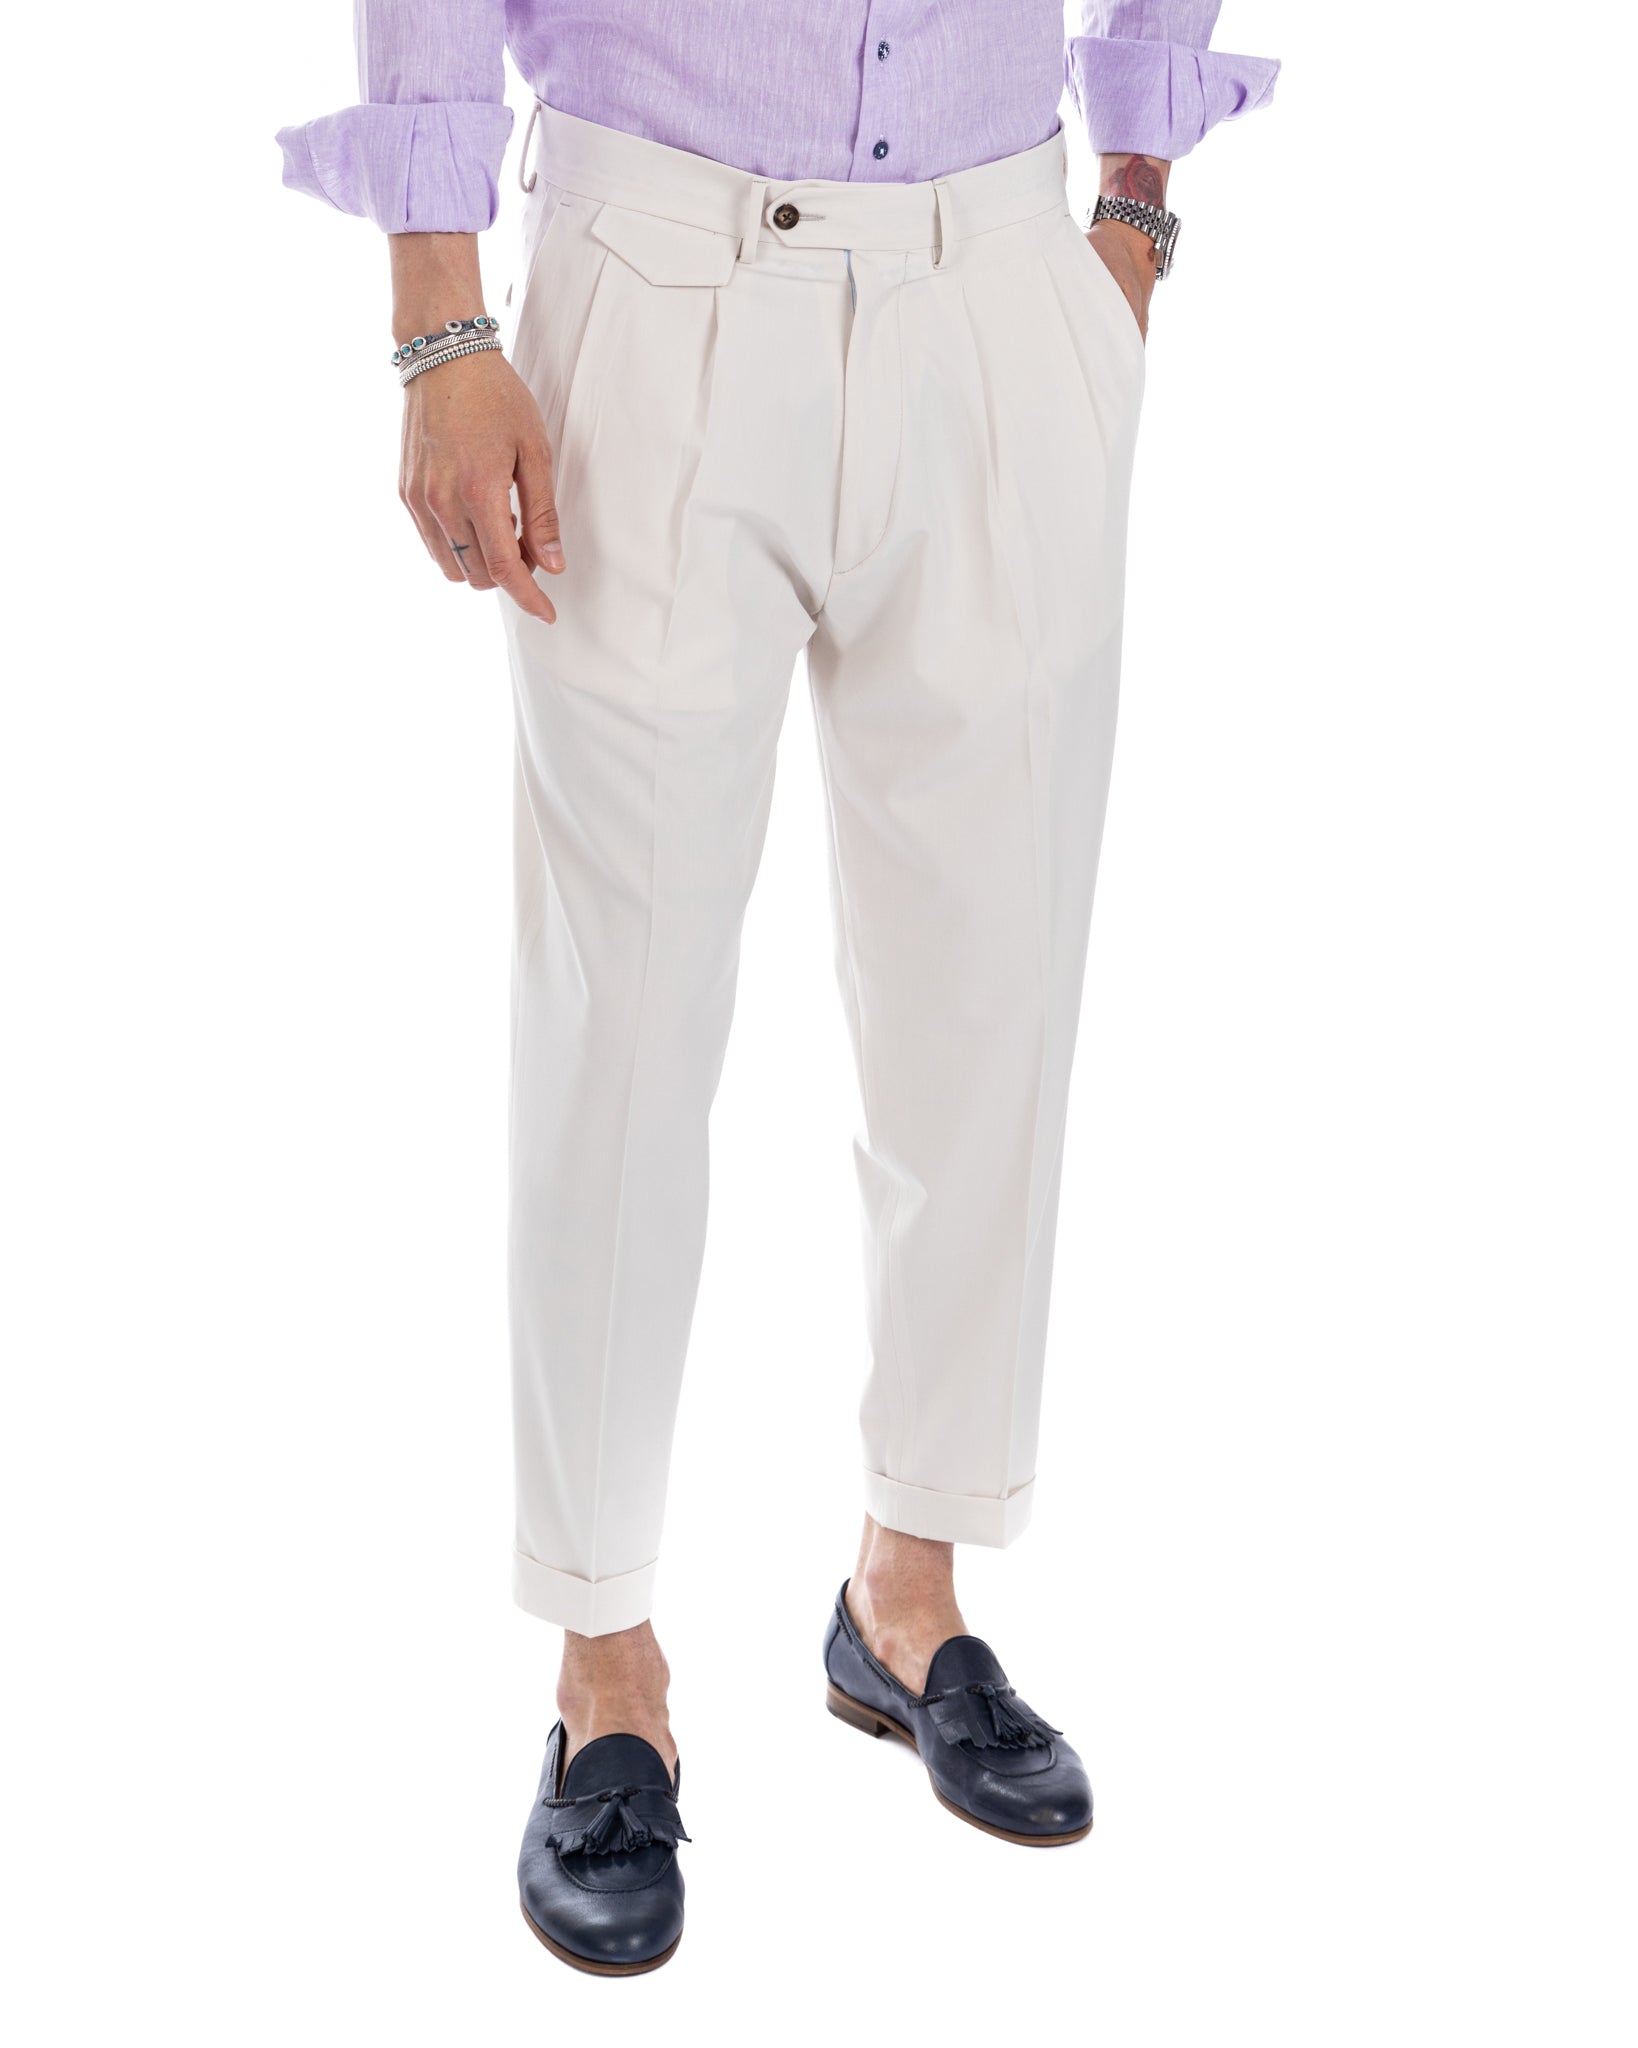 Taylor - cream high-waisted trousers